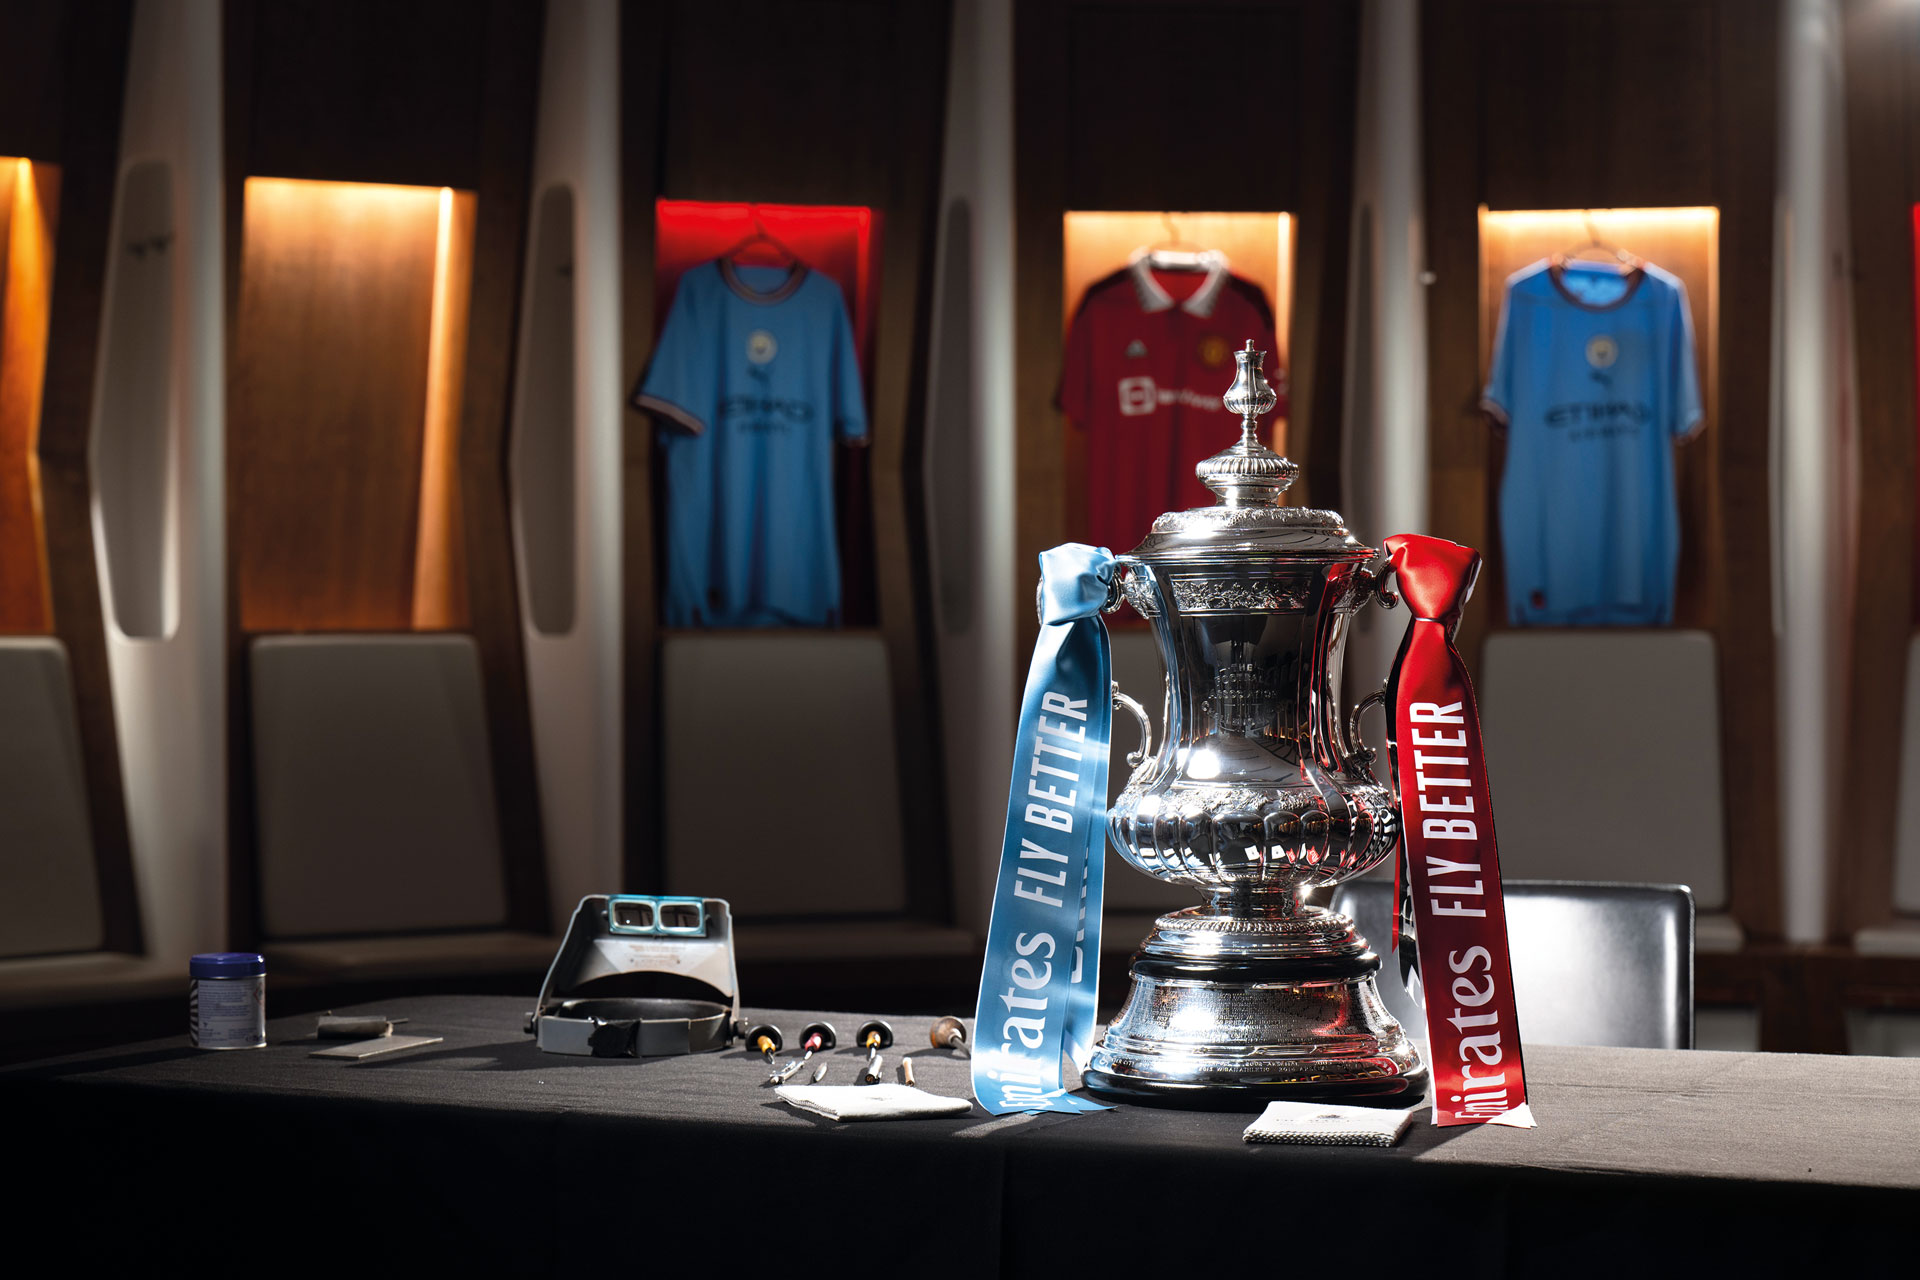 How Thomas Lyte Came To Be The Trusted Brand Behind The FA Cup